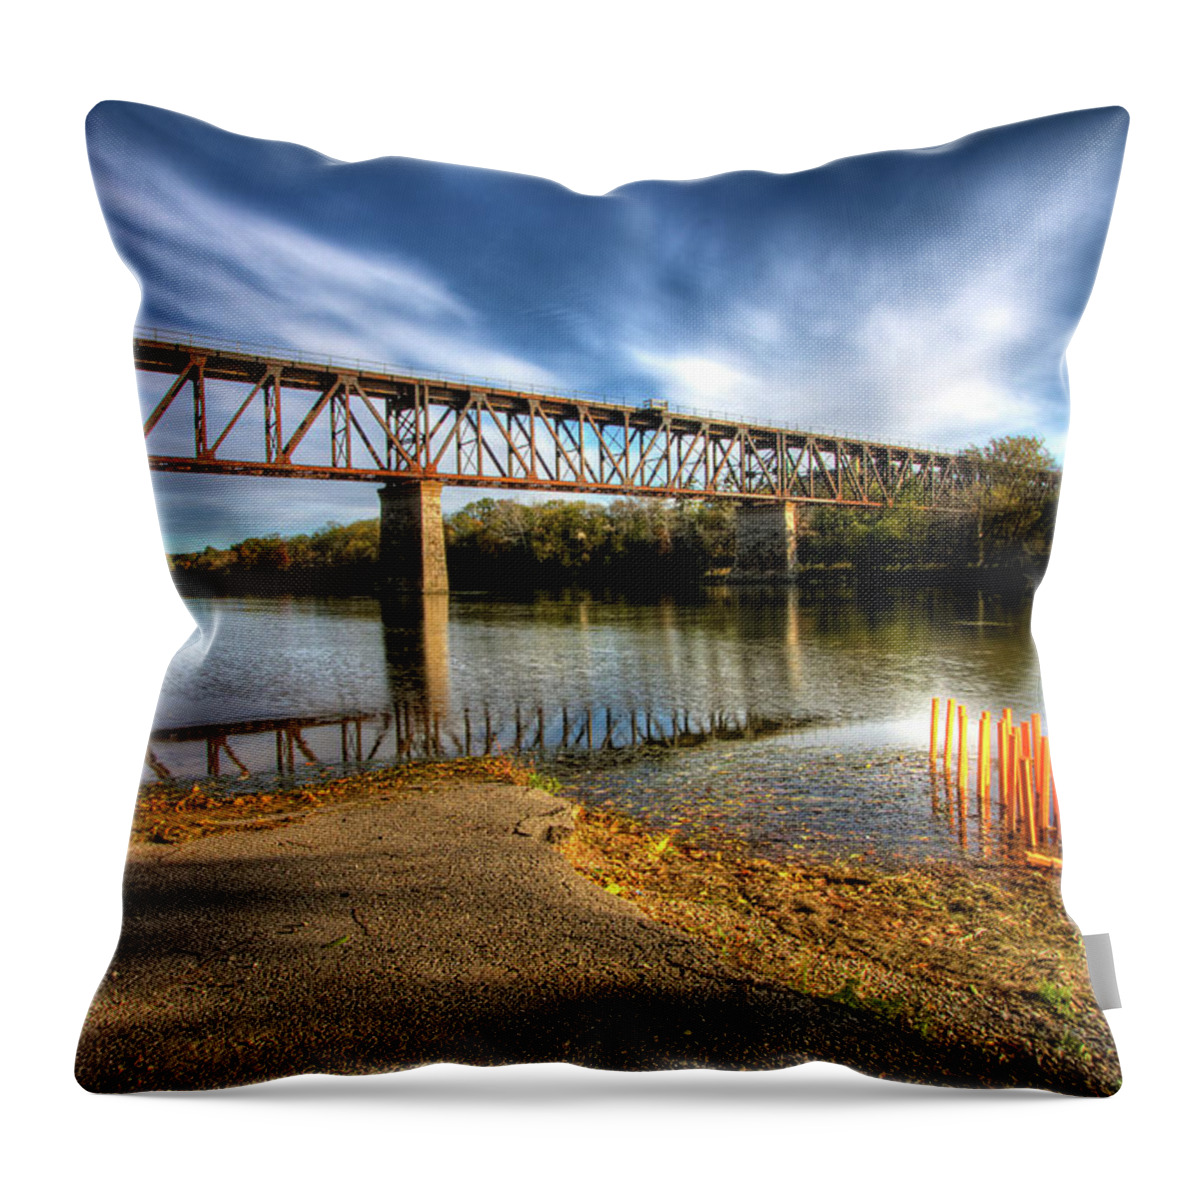 Tranquility Throw Pillow featuring the photograph Cpr Railway Bridge Galt Cambridge by Pamela Lao